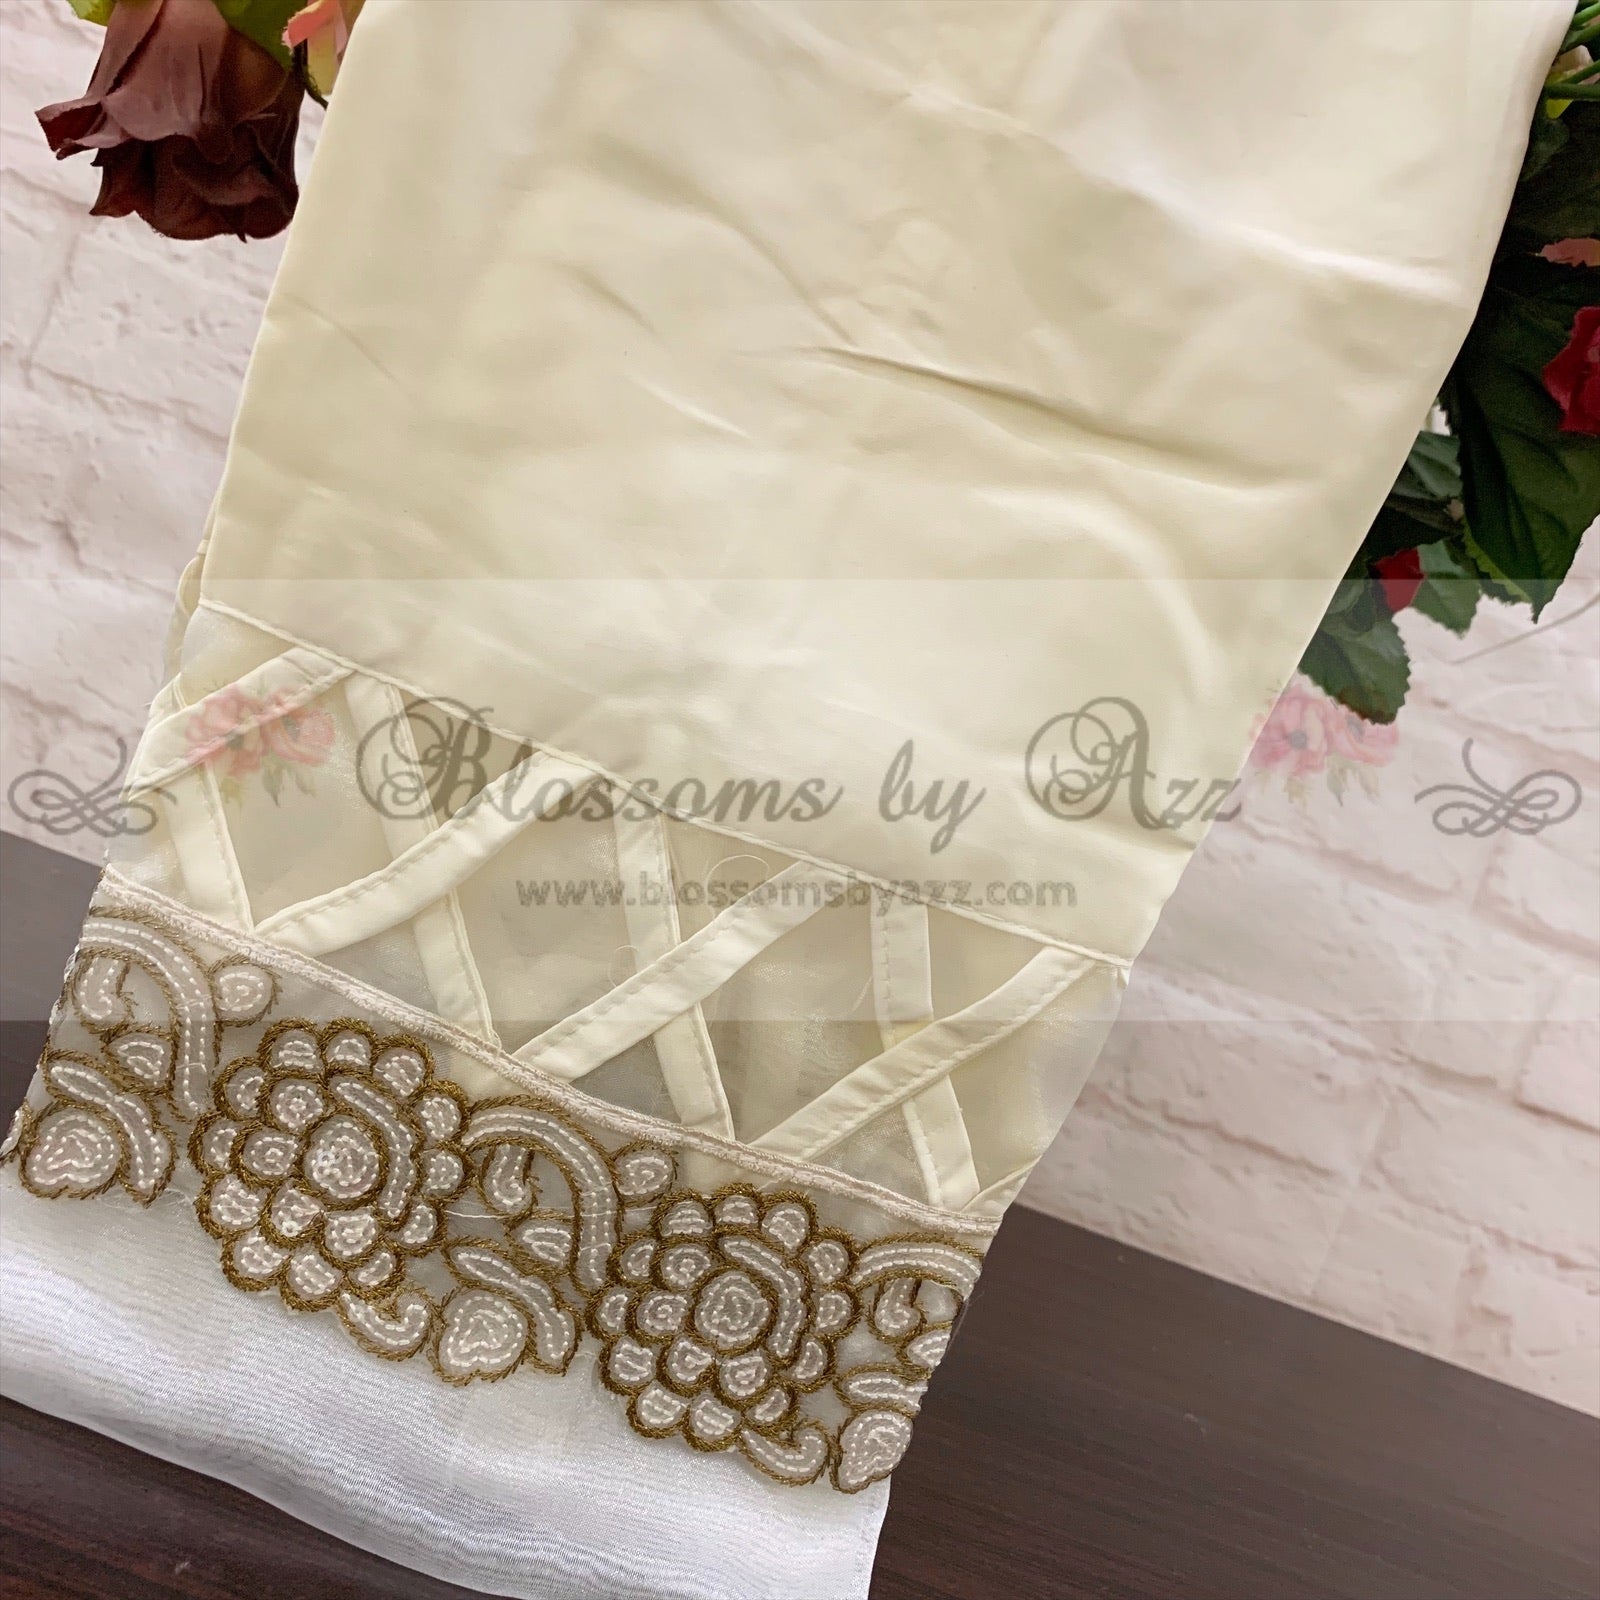 Straight Pants - Cream - Embroidered Silk - Blossoms by Azz